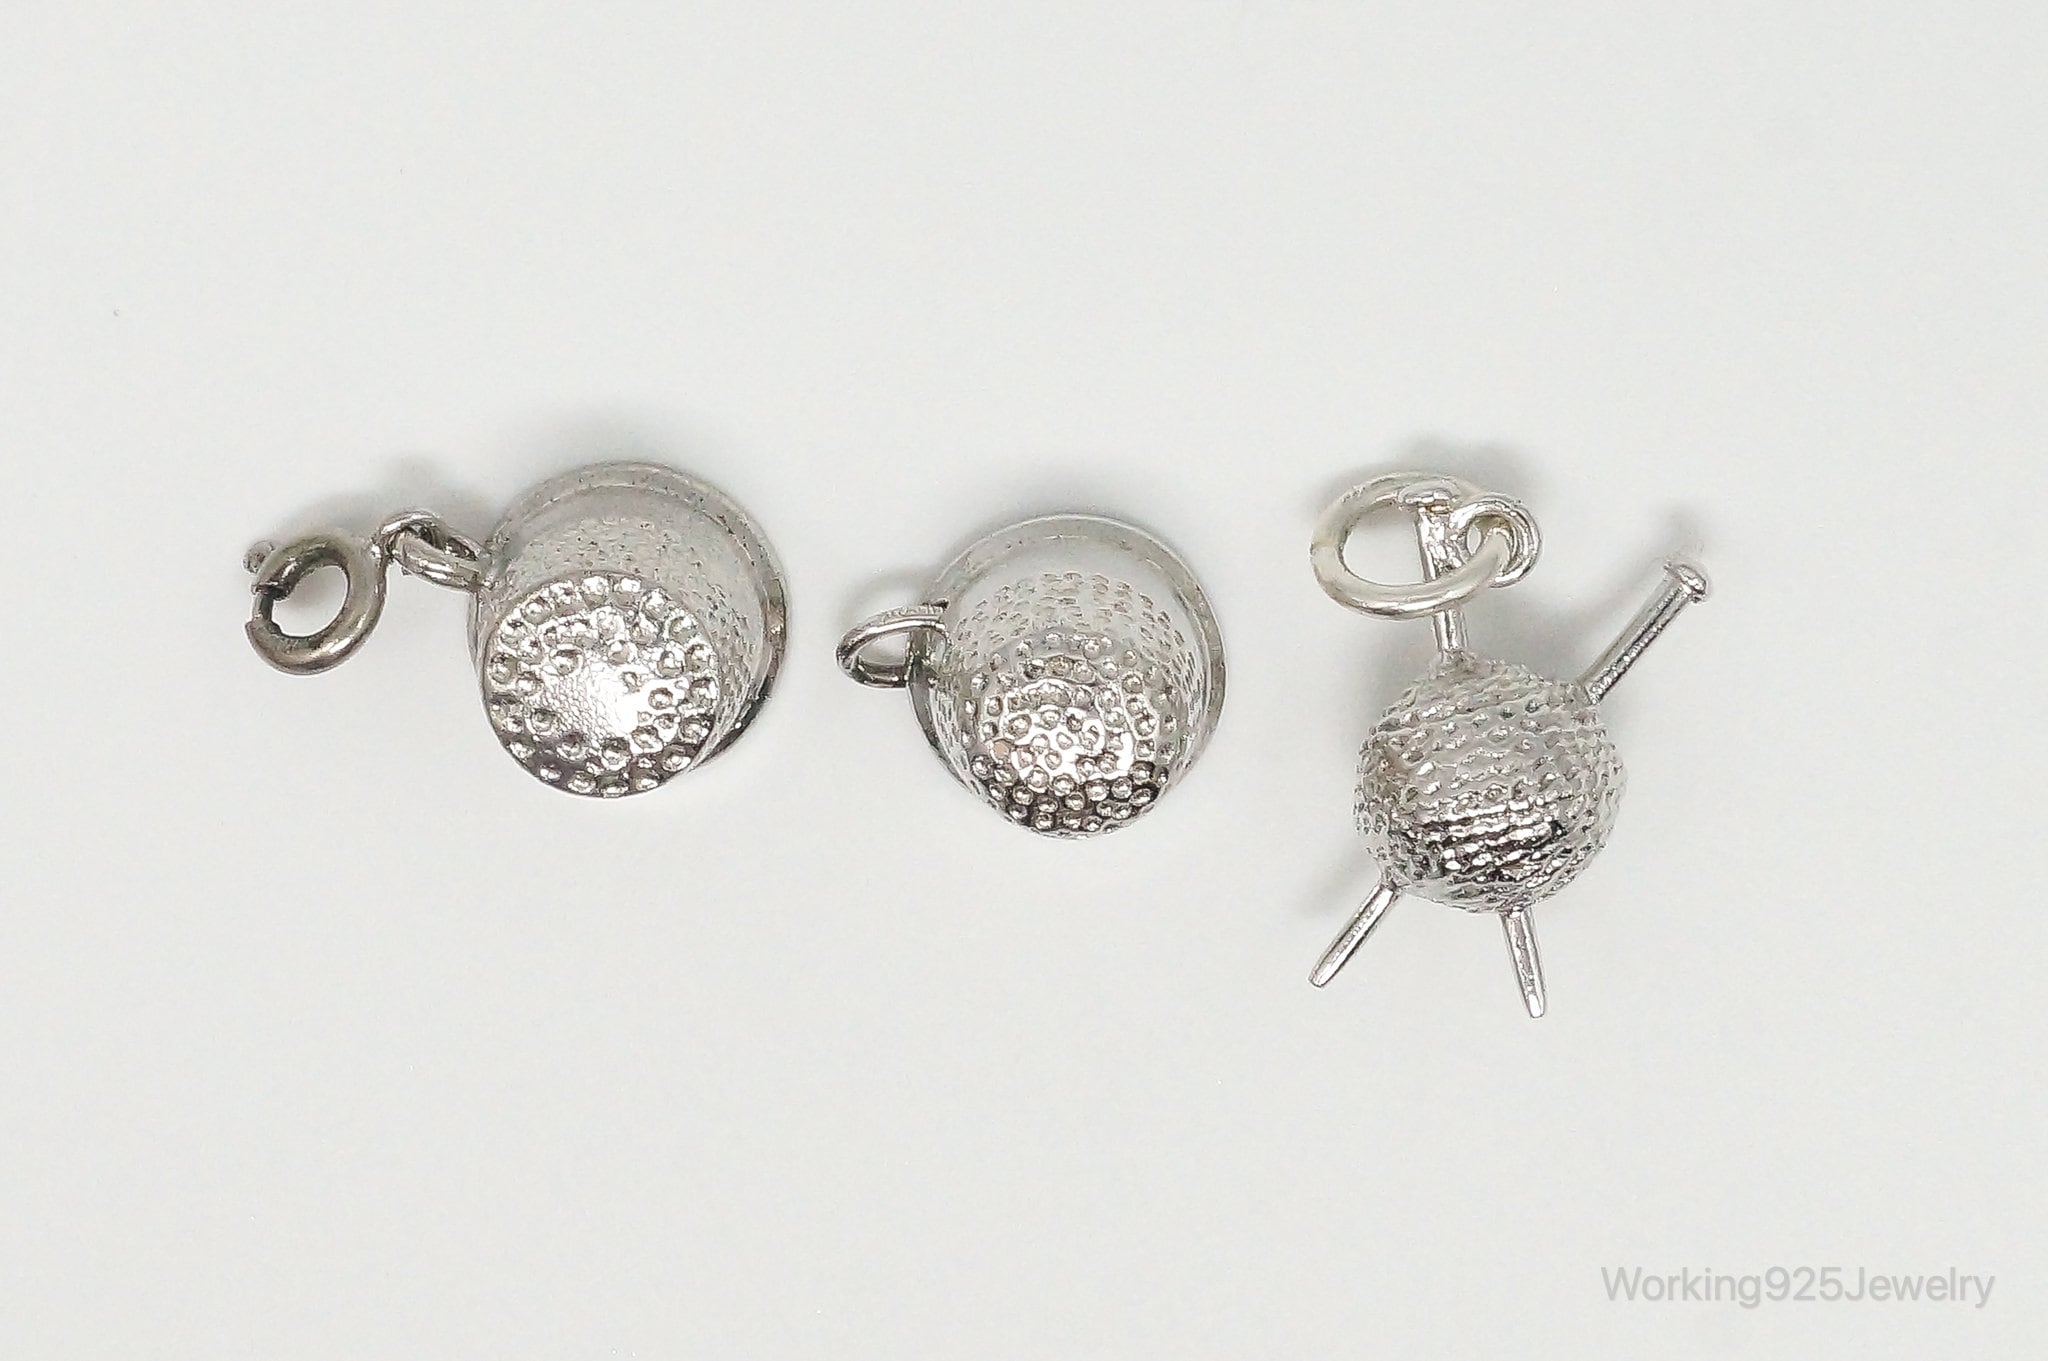 Vintage Sewing Knitting Crocheting Hobby Sterling Silver Charms Lot